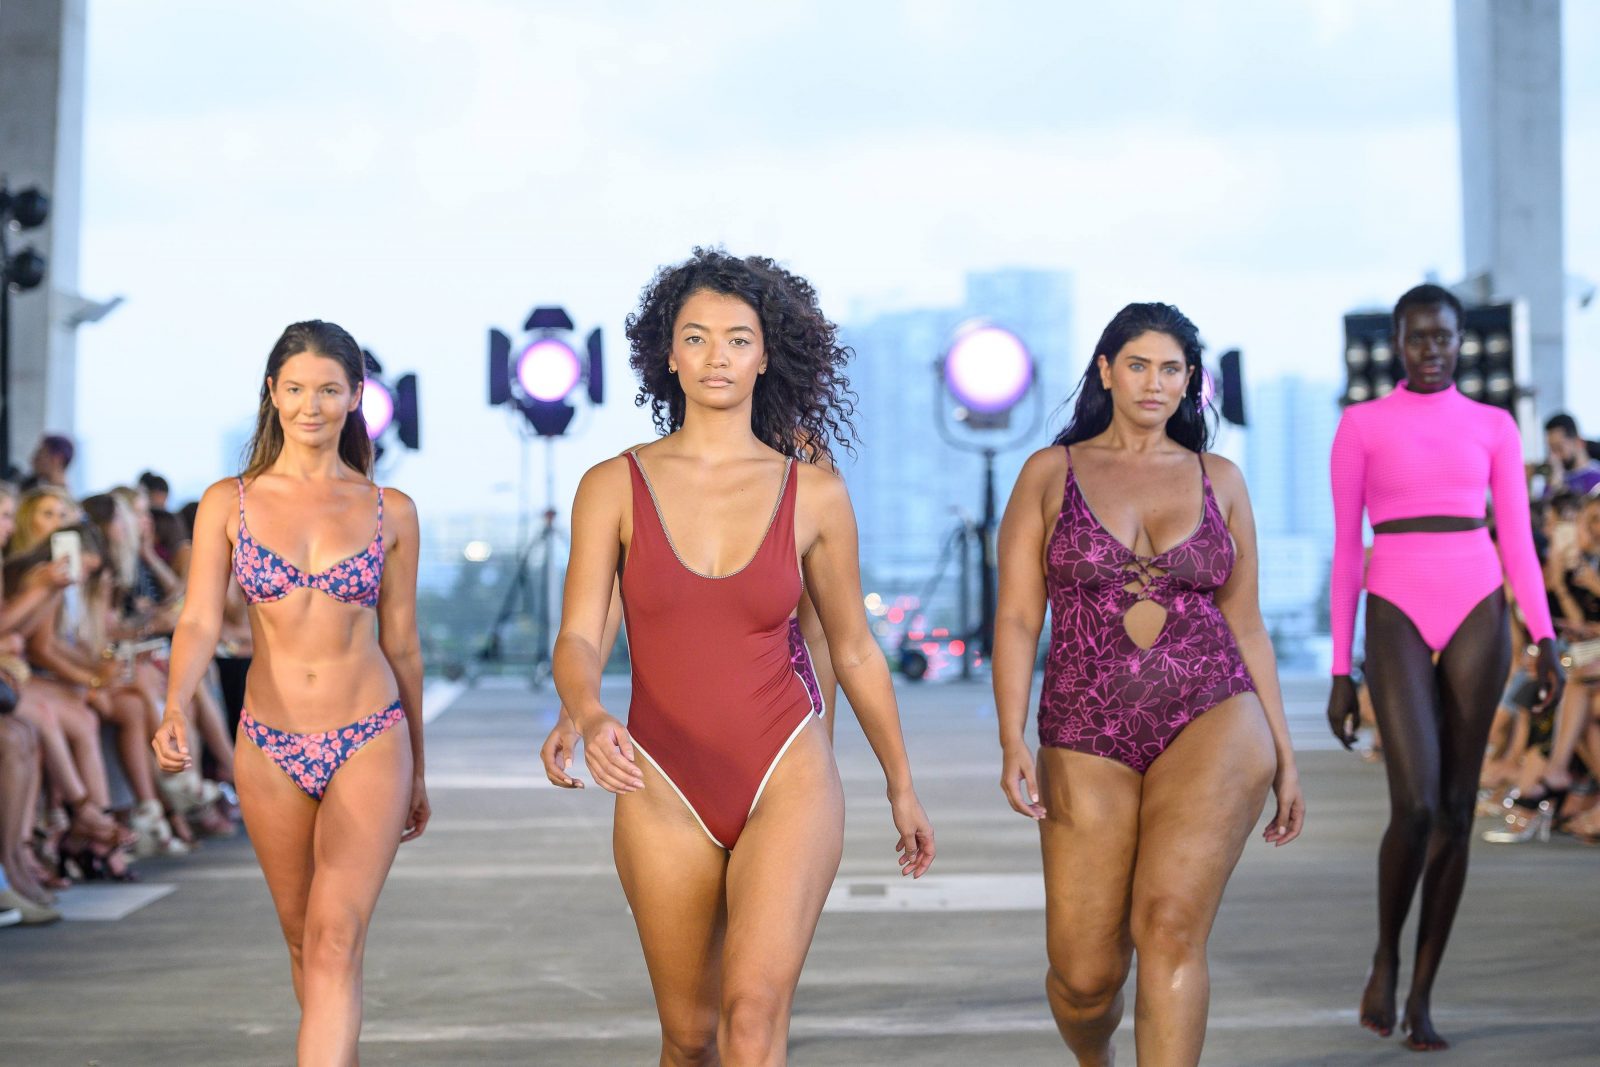 Lounge debuts first ever swimwear collection at Miami Swim Week